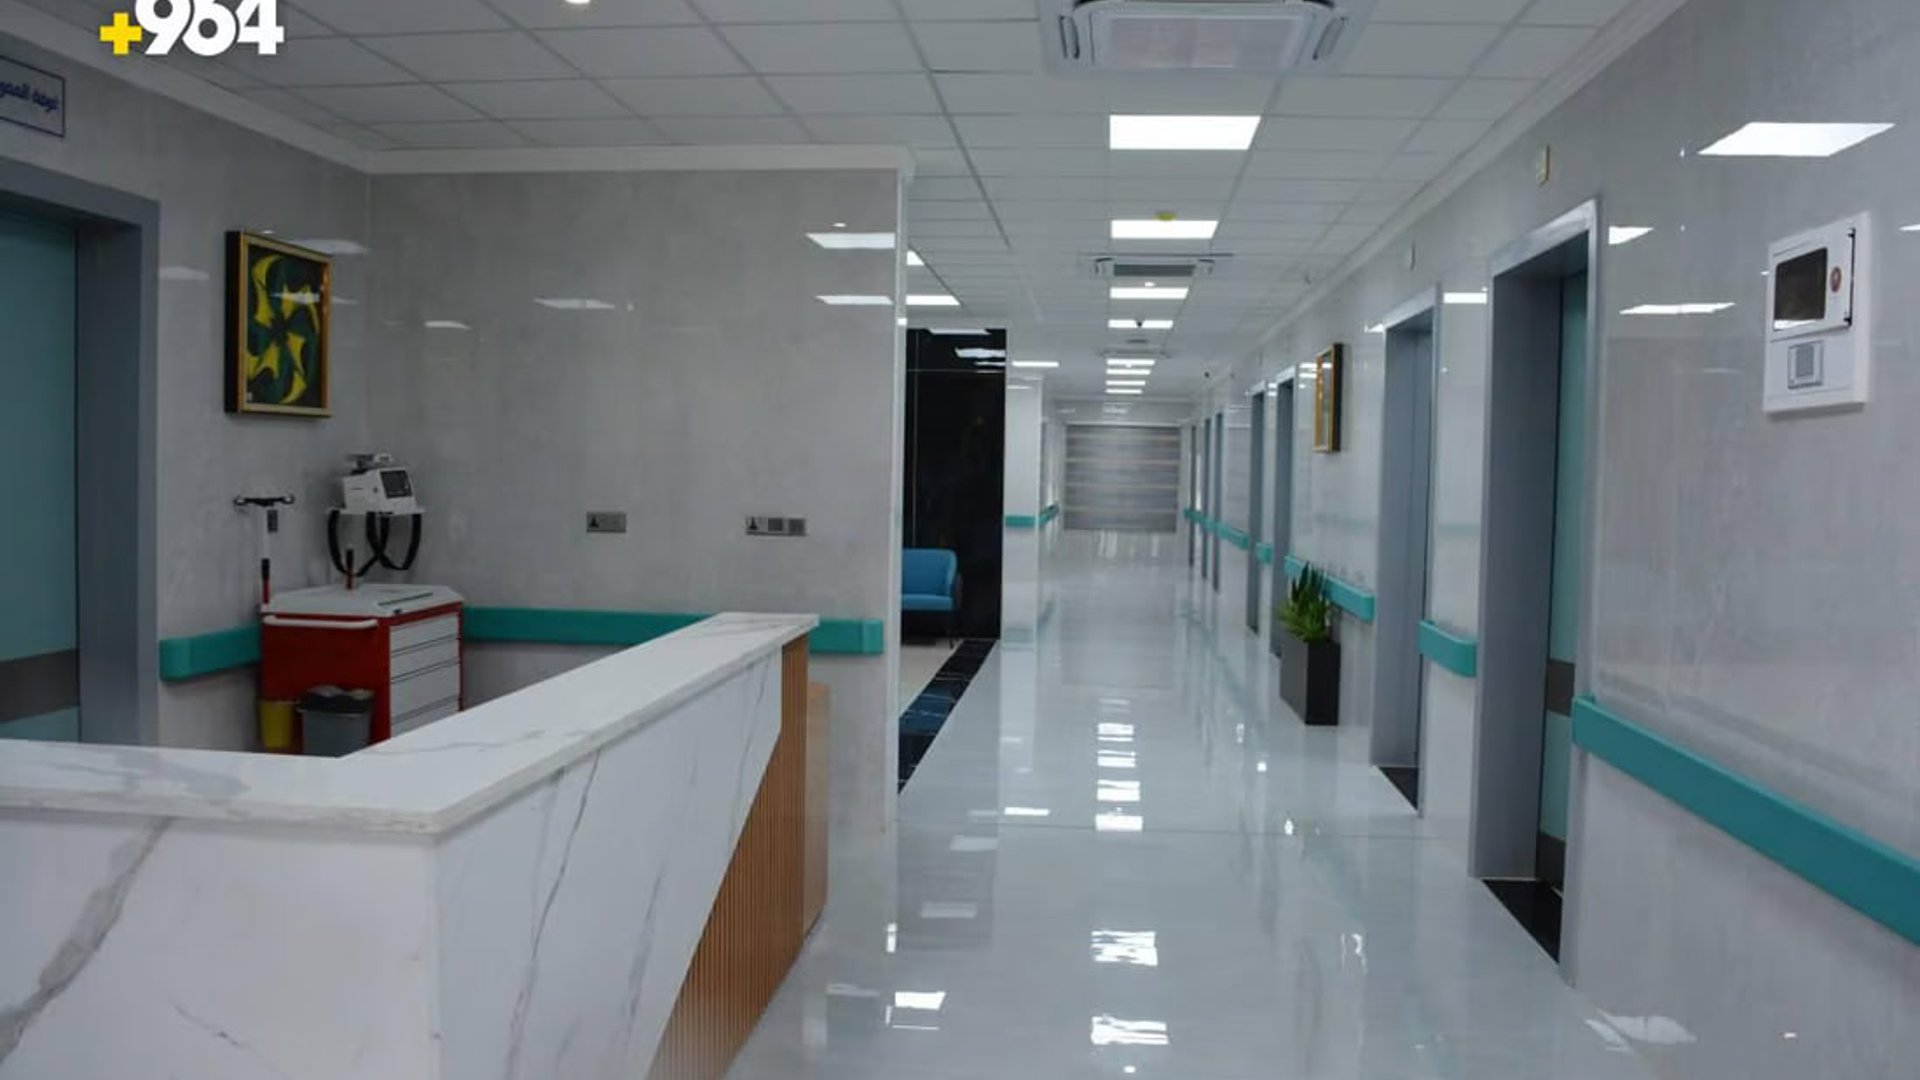 New private hospital in Kut focuses on affordable medical care